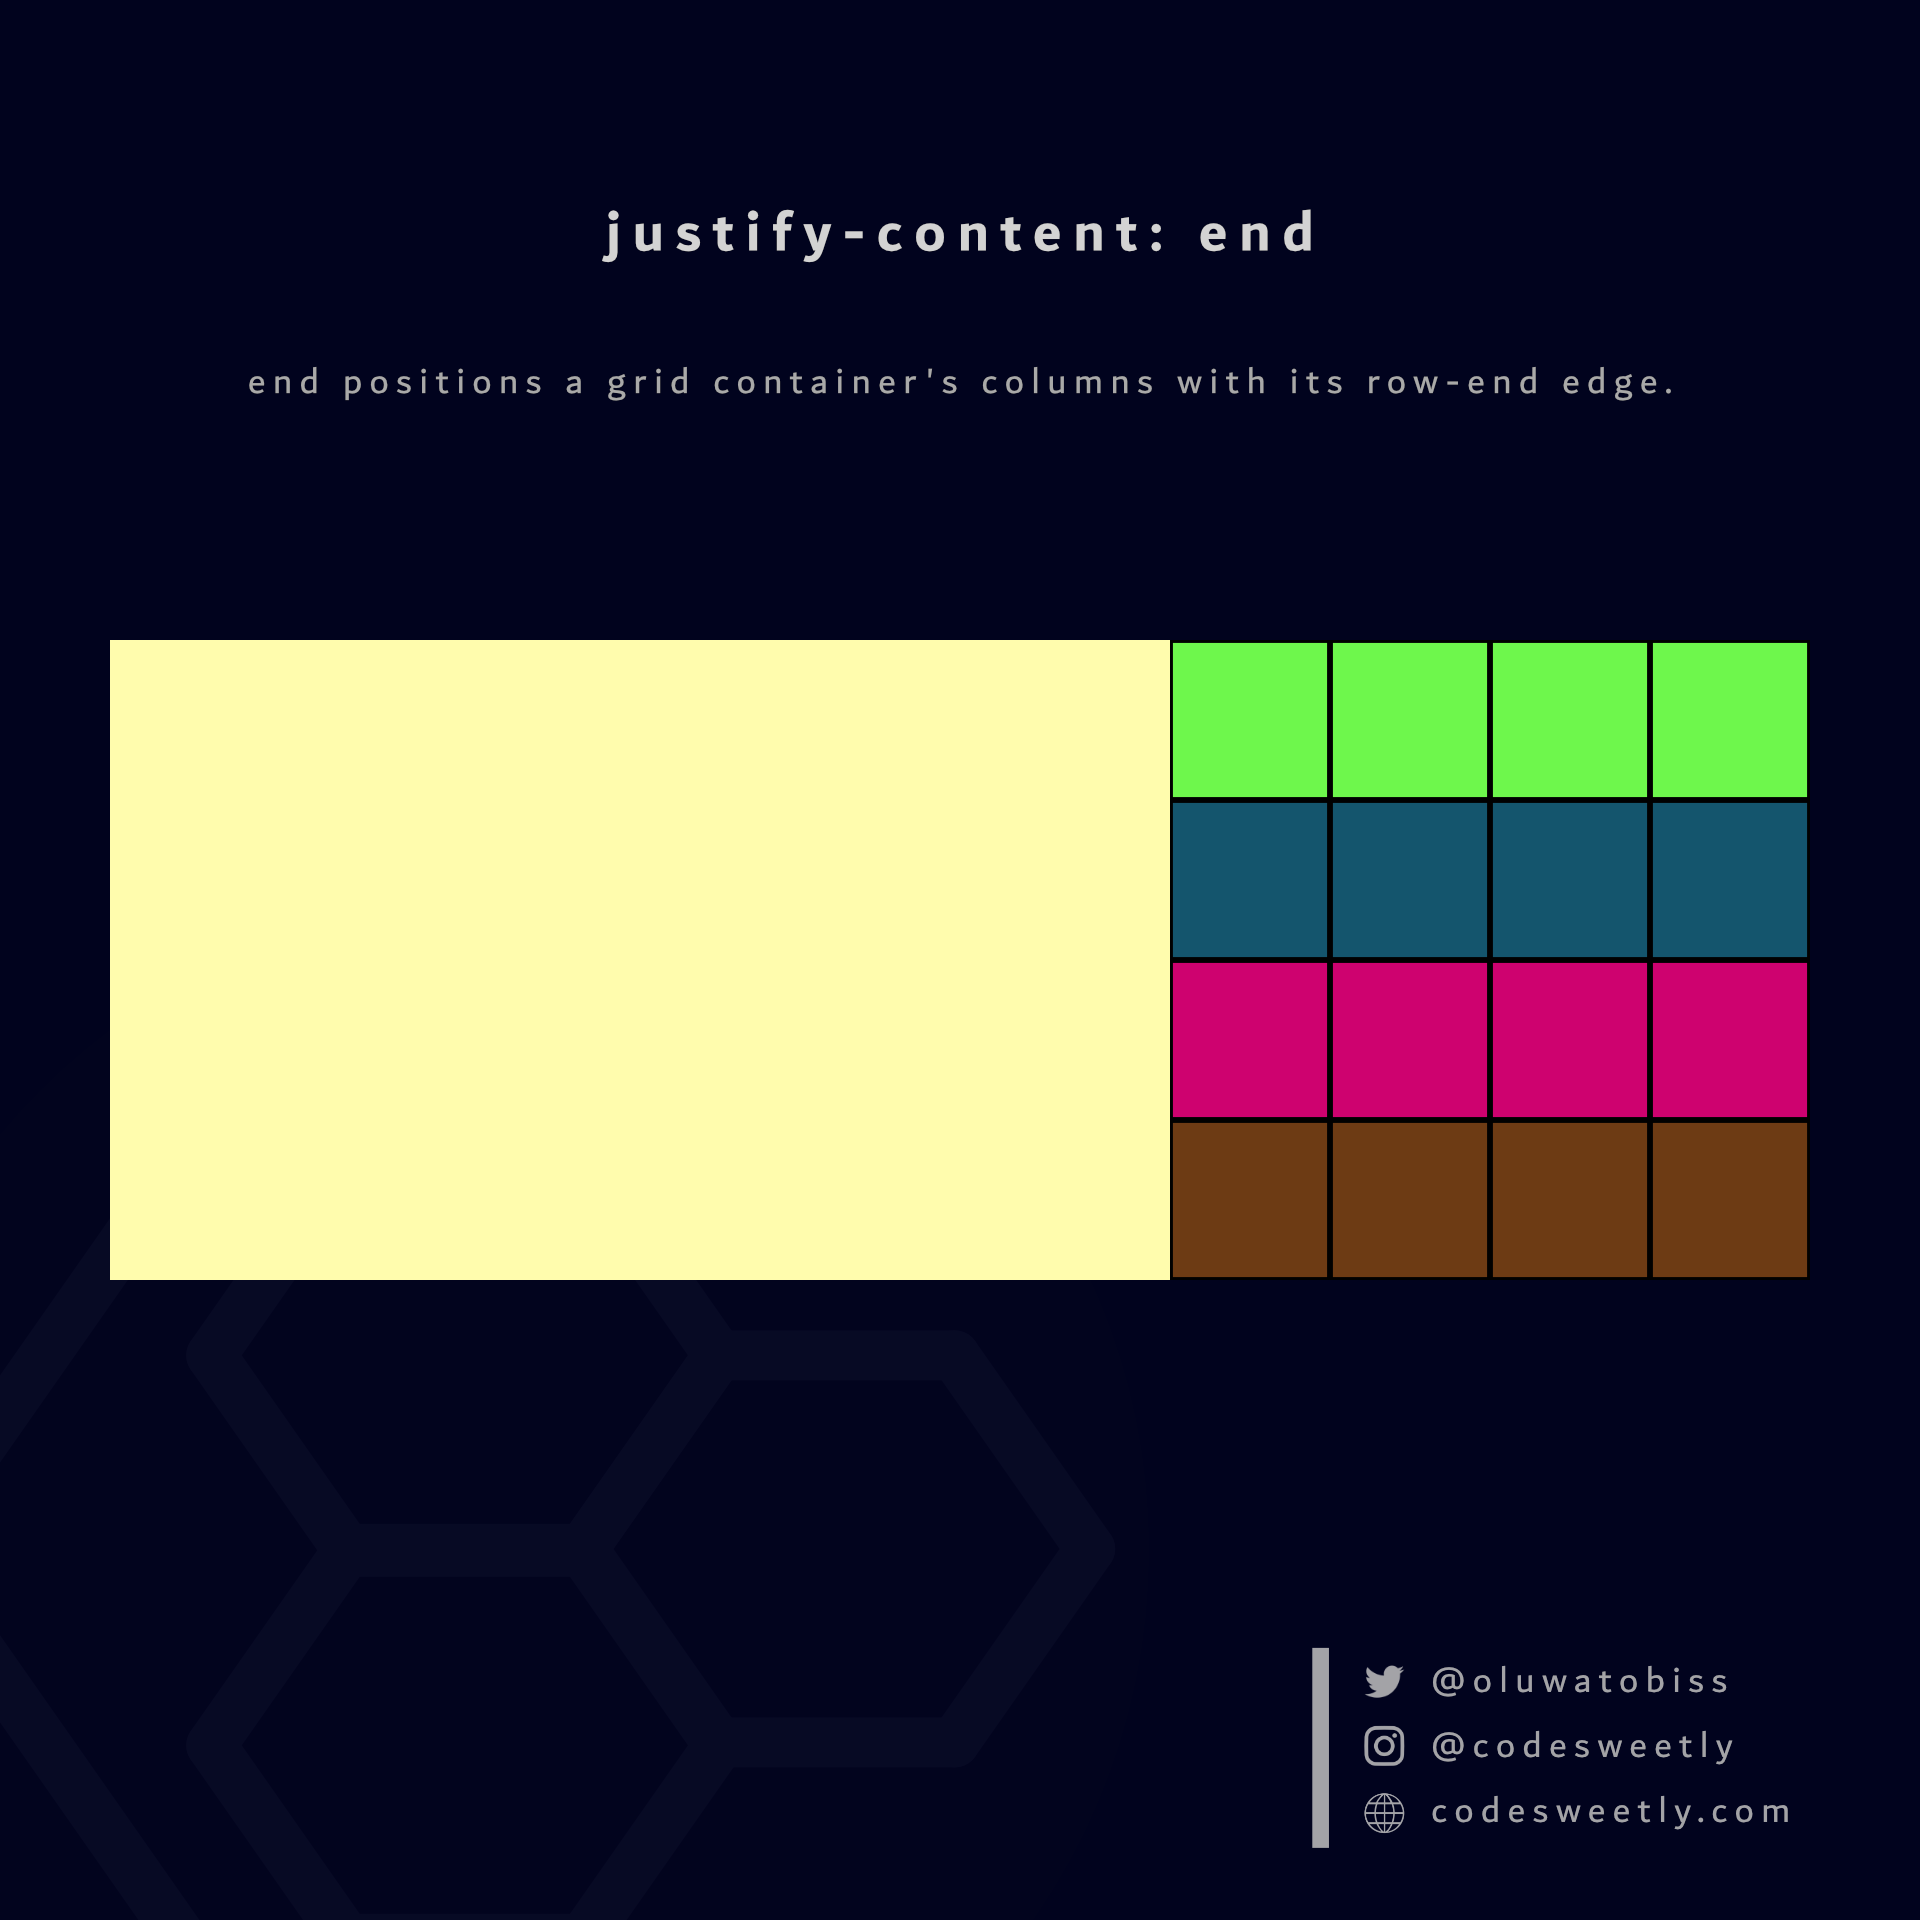 justify-content's end value positions columns to the grid container's row-end edge